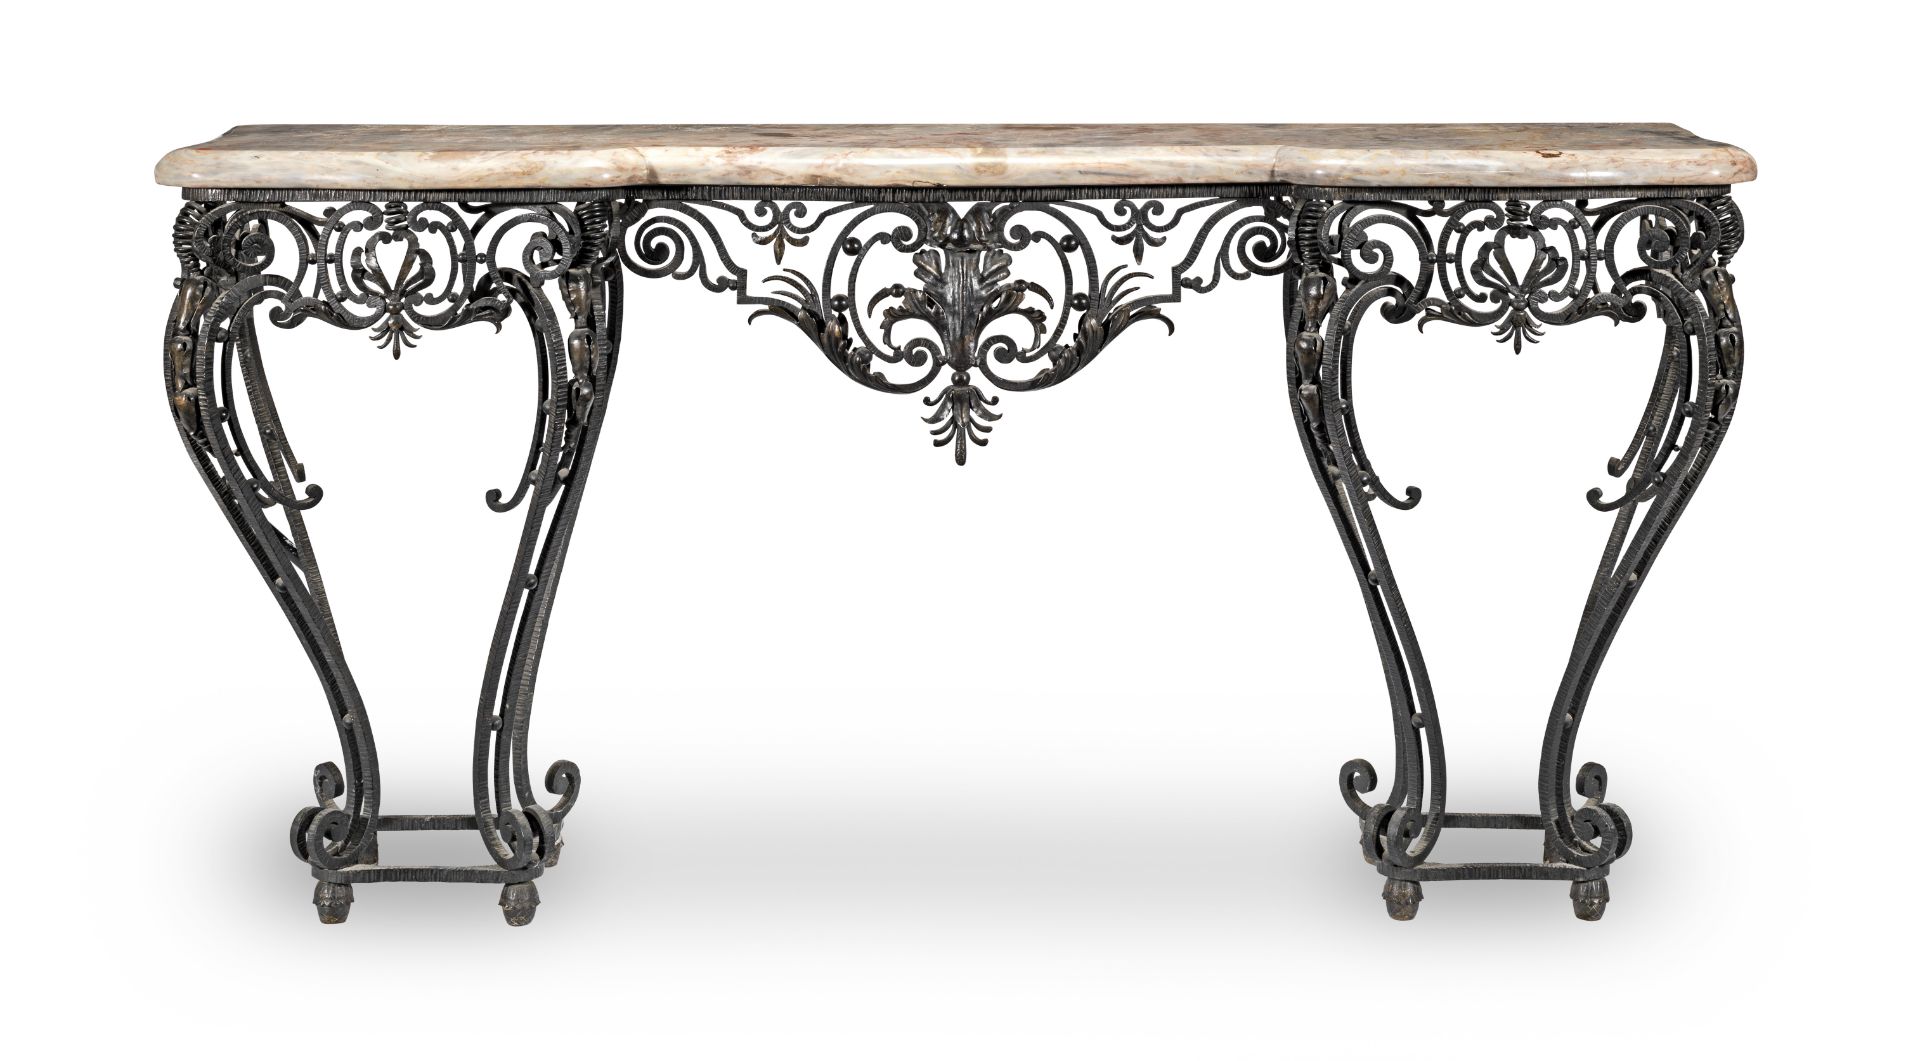 A French late 19th century wrought iron console table